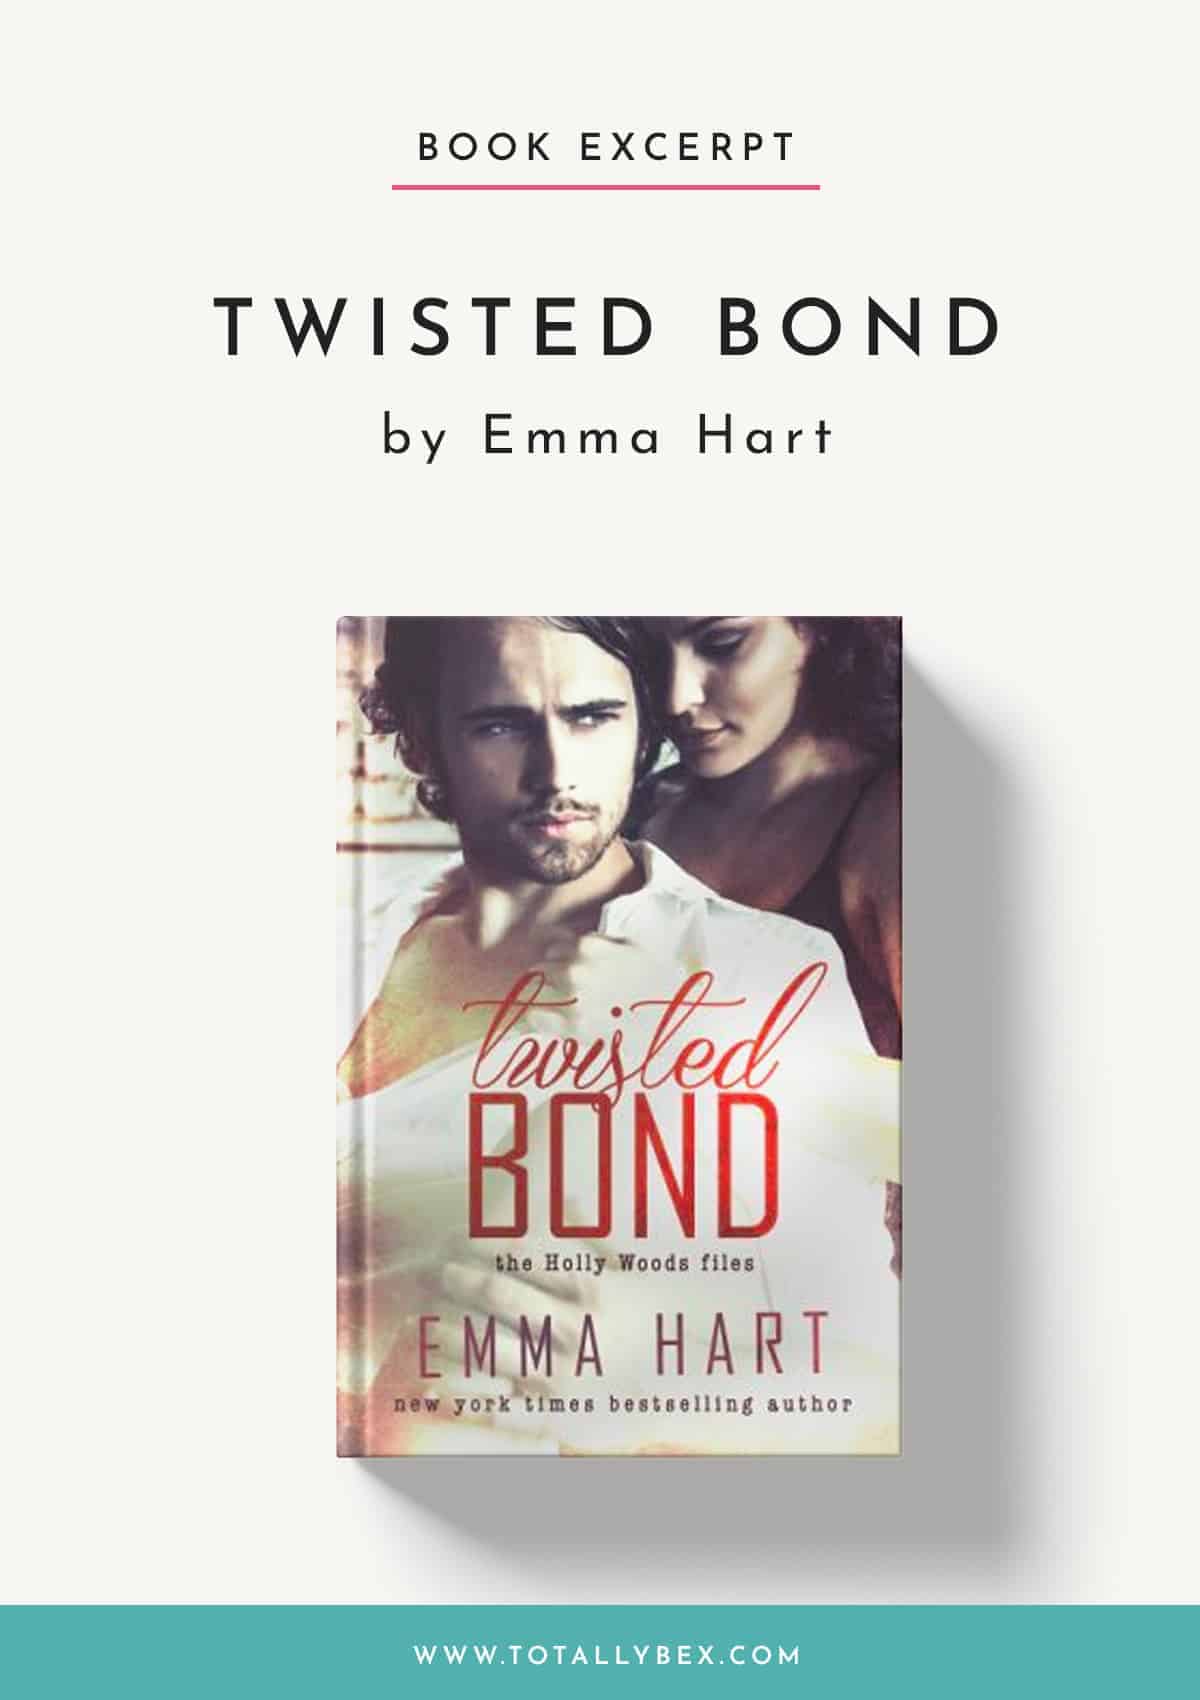 Twisted Bond by Emma Hart-BookExcerpt